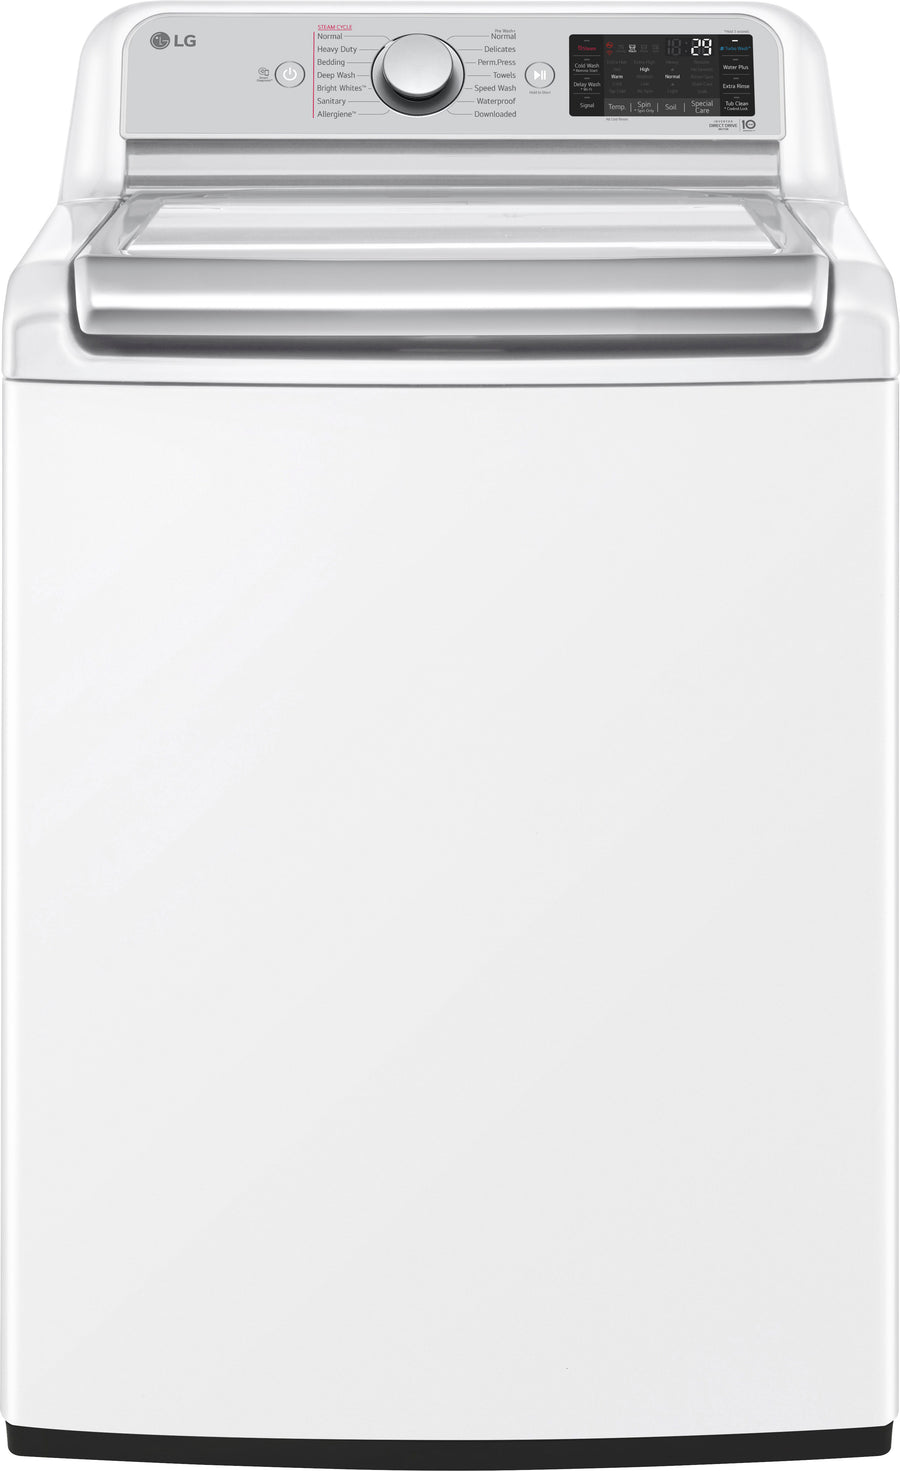 LG - 5.5 Cu. Ft. High-Efficiency Smart Top Load Washer with Steam and TurboWash3D Technology - White_0